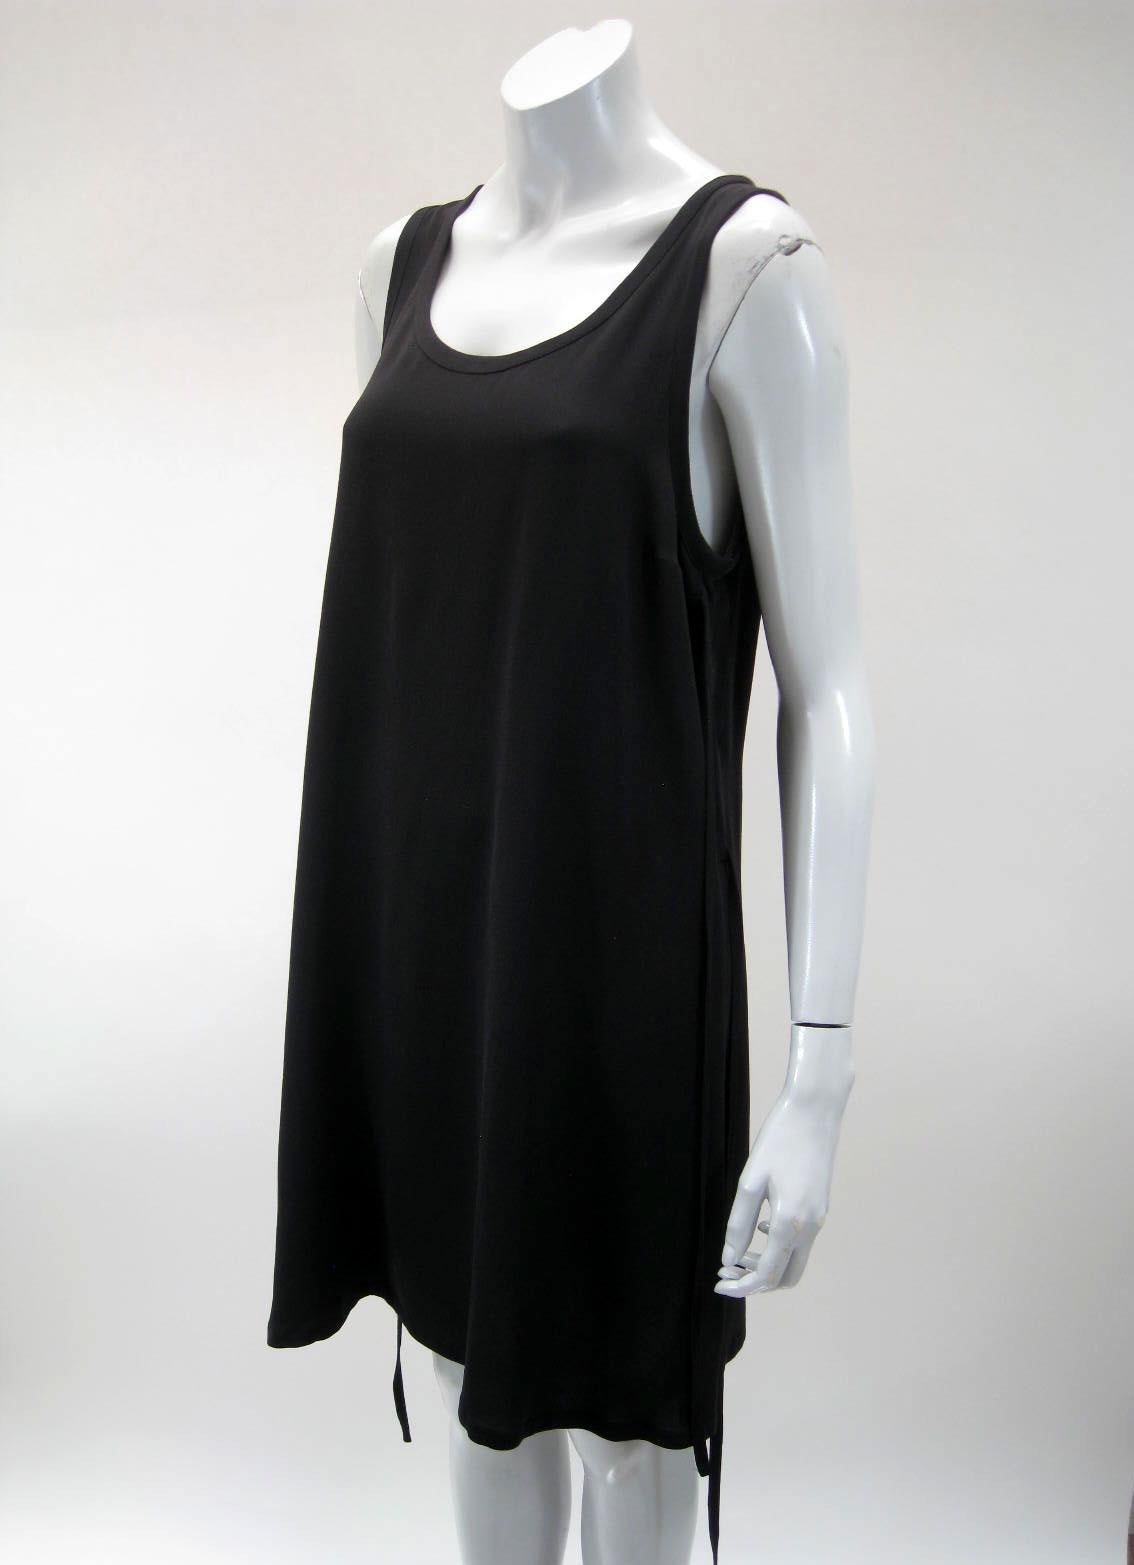 Ann Demeulemeester elegant simple black dress.

U-neck and sleeveless.

Two side ties on each side, can be tied or left loose.

Semi sheer fabric.

Fabric is silk.

Tagged size 38.

This item is in excellent vintage condition with no rips, tears or